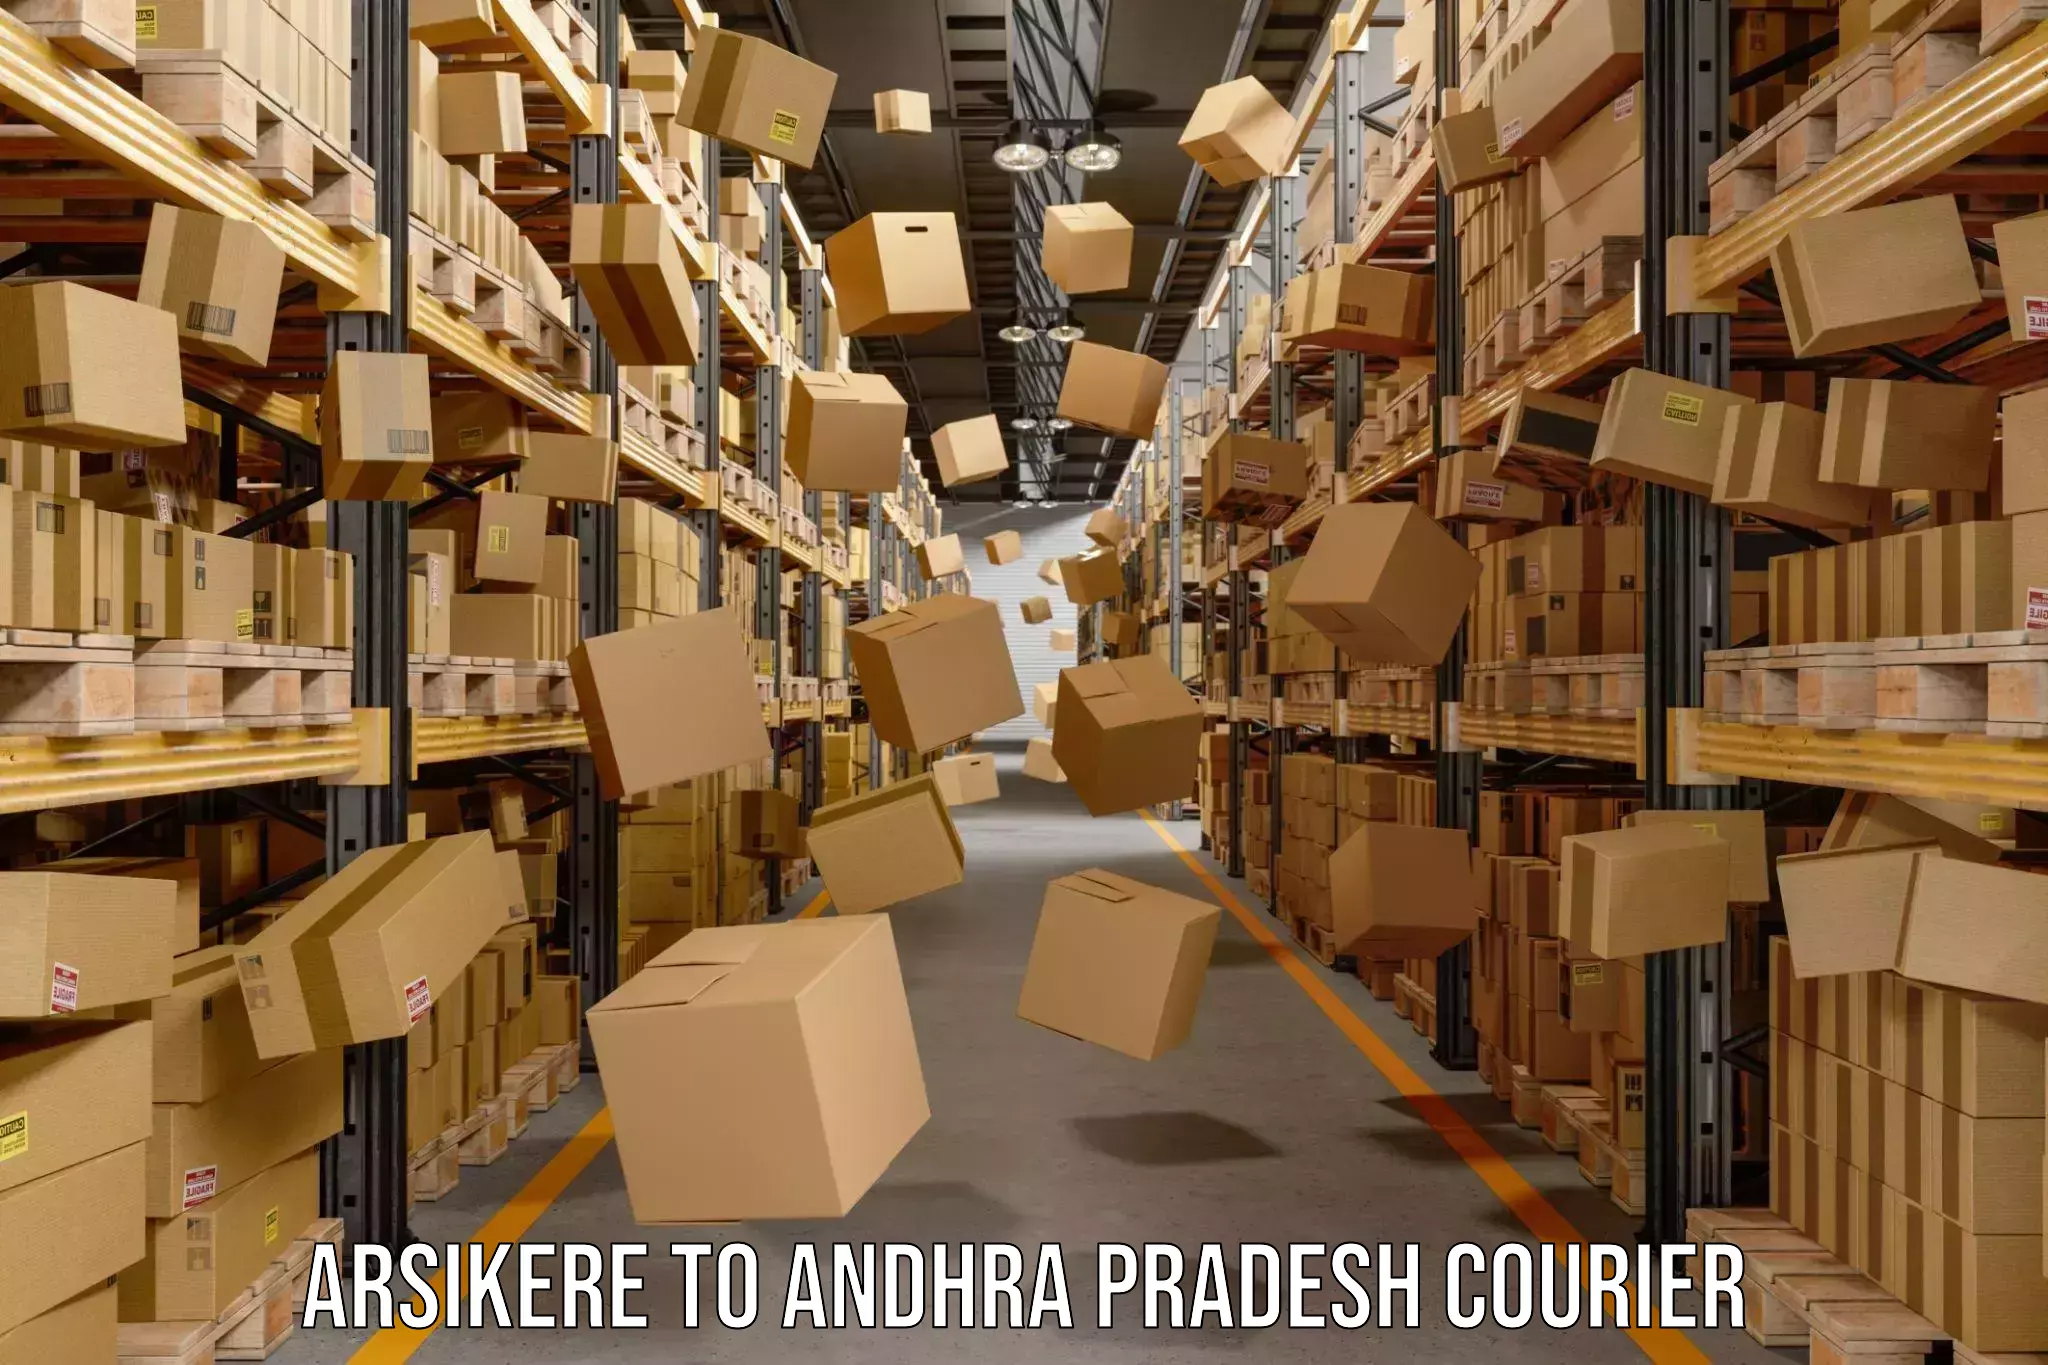 Same-day delivery solutions Arsikere to Andhra Pradesh